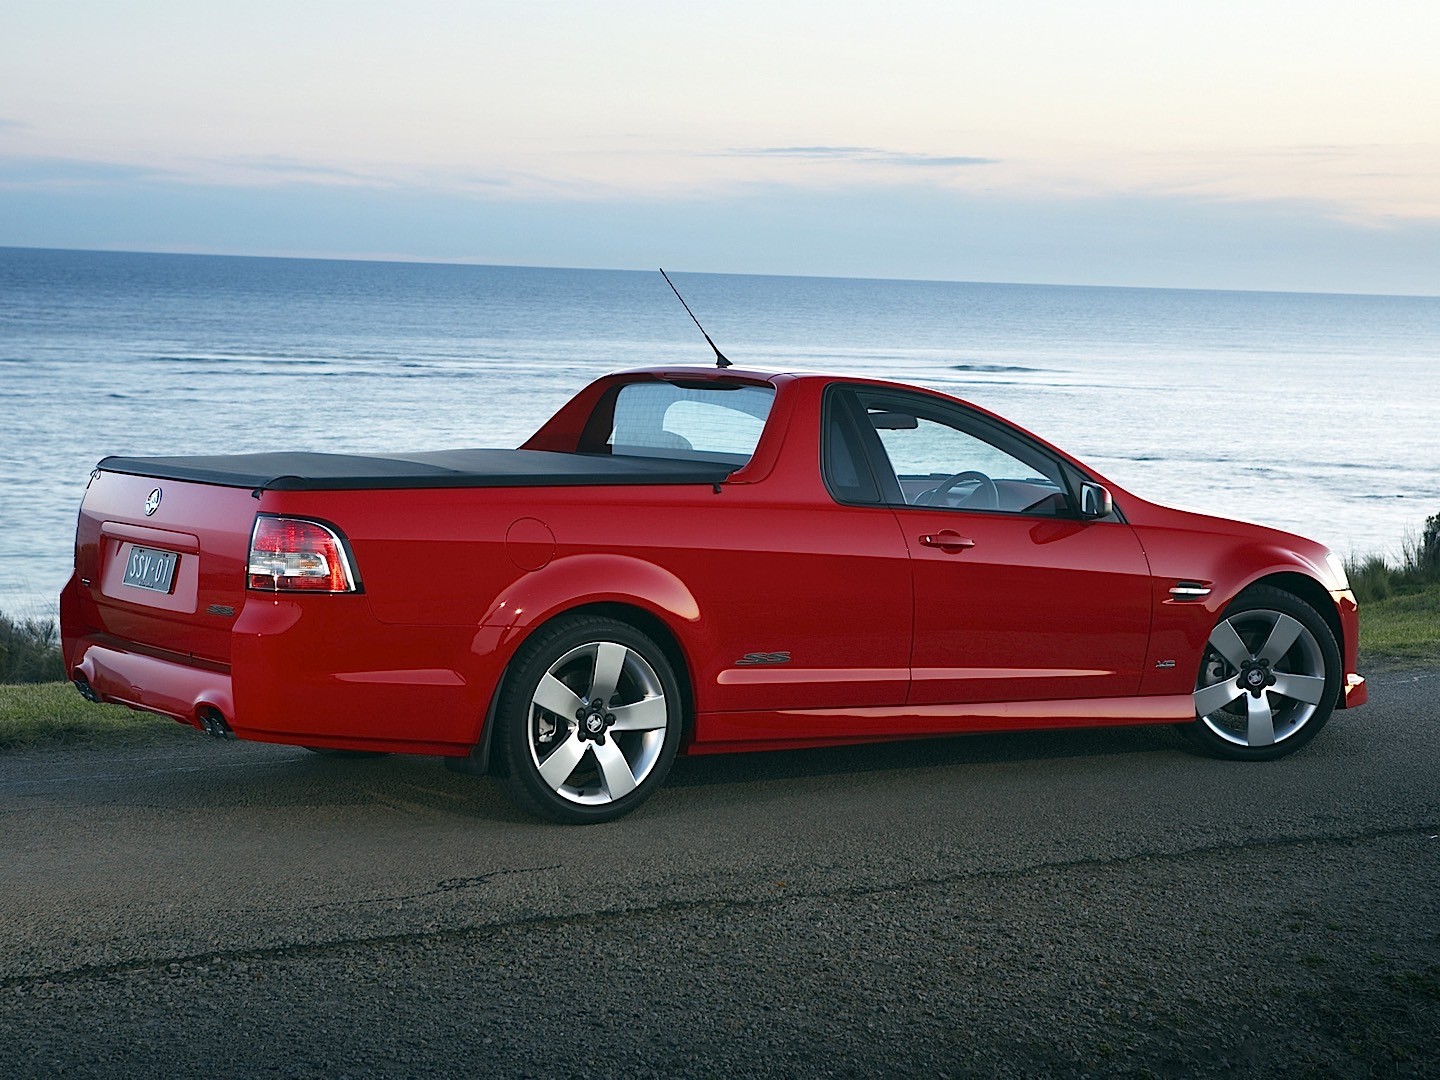 Holden Ute Backgrounds, Compatible - PC, Mobile, Gadgets| 1440x1080 px